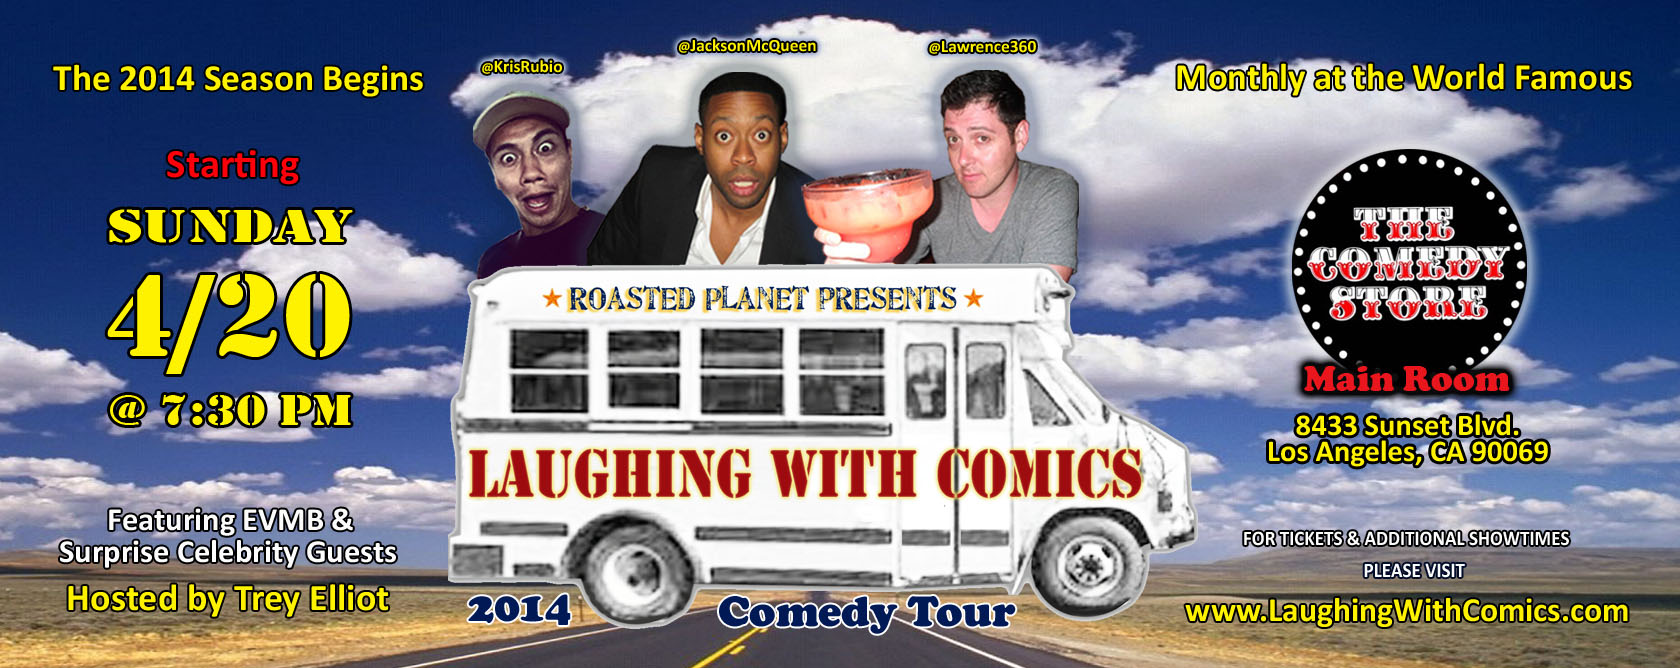 Laughing with Comics 2014 Comedy Tour visits The world famous Comedy Store